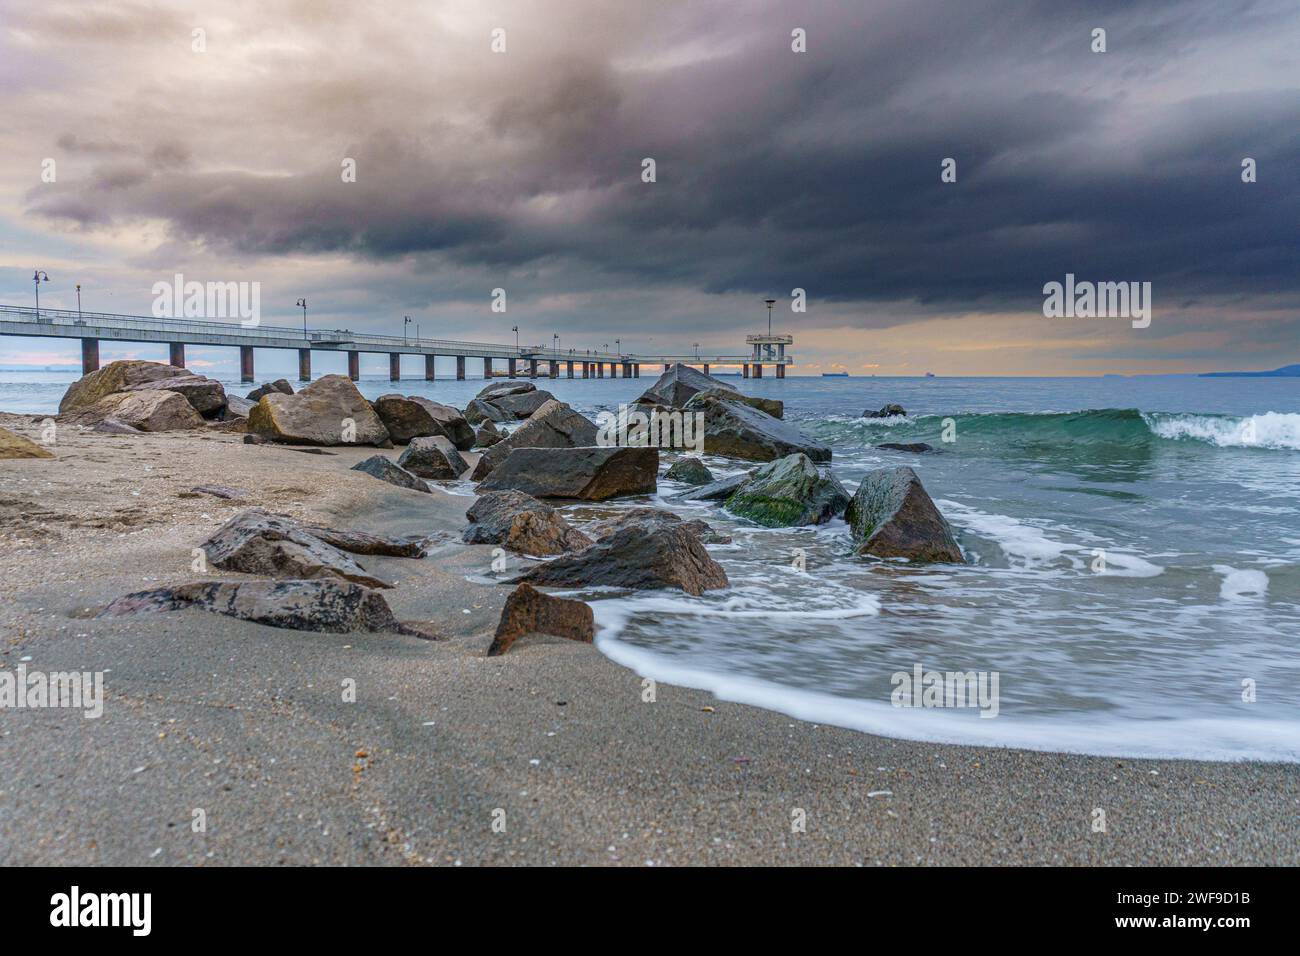 A pier extending over calm waters, adjacent to a sandy beach, beneath overcast skies Stock Photo